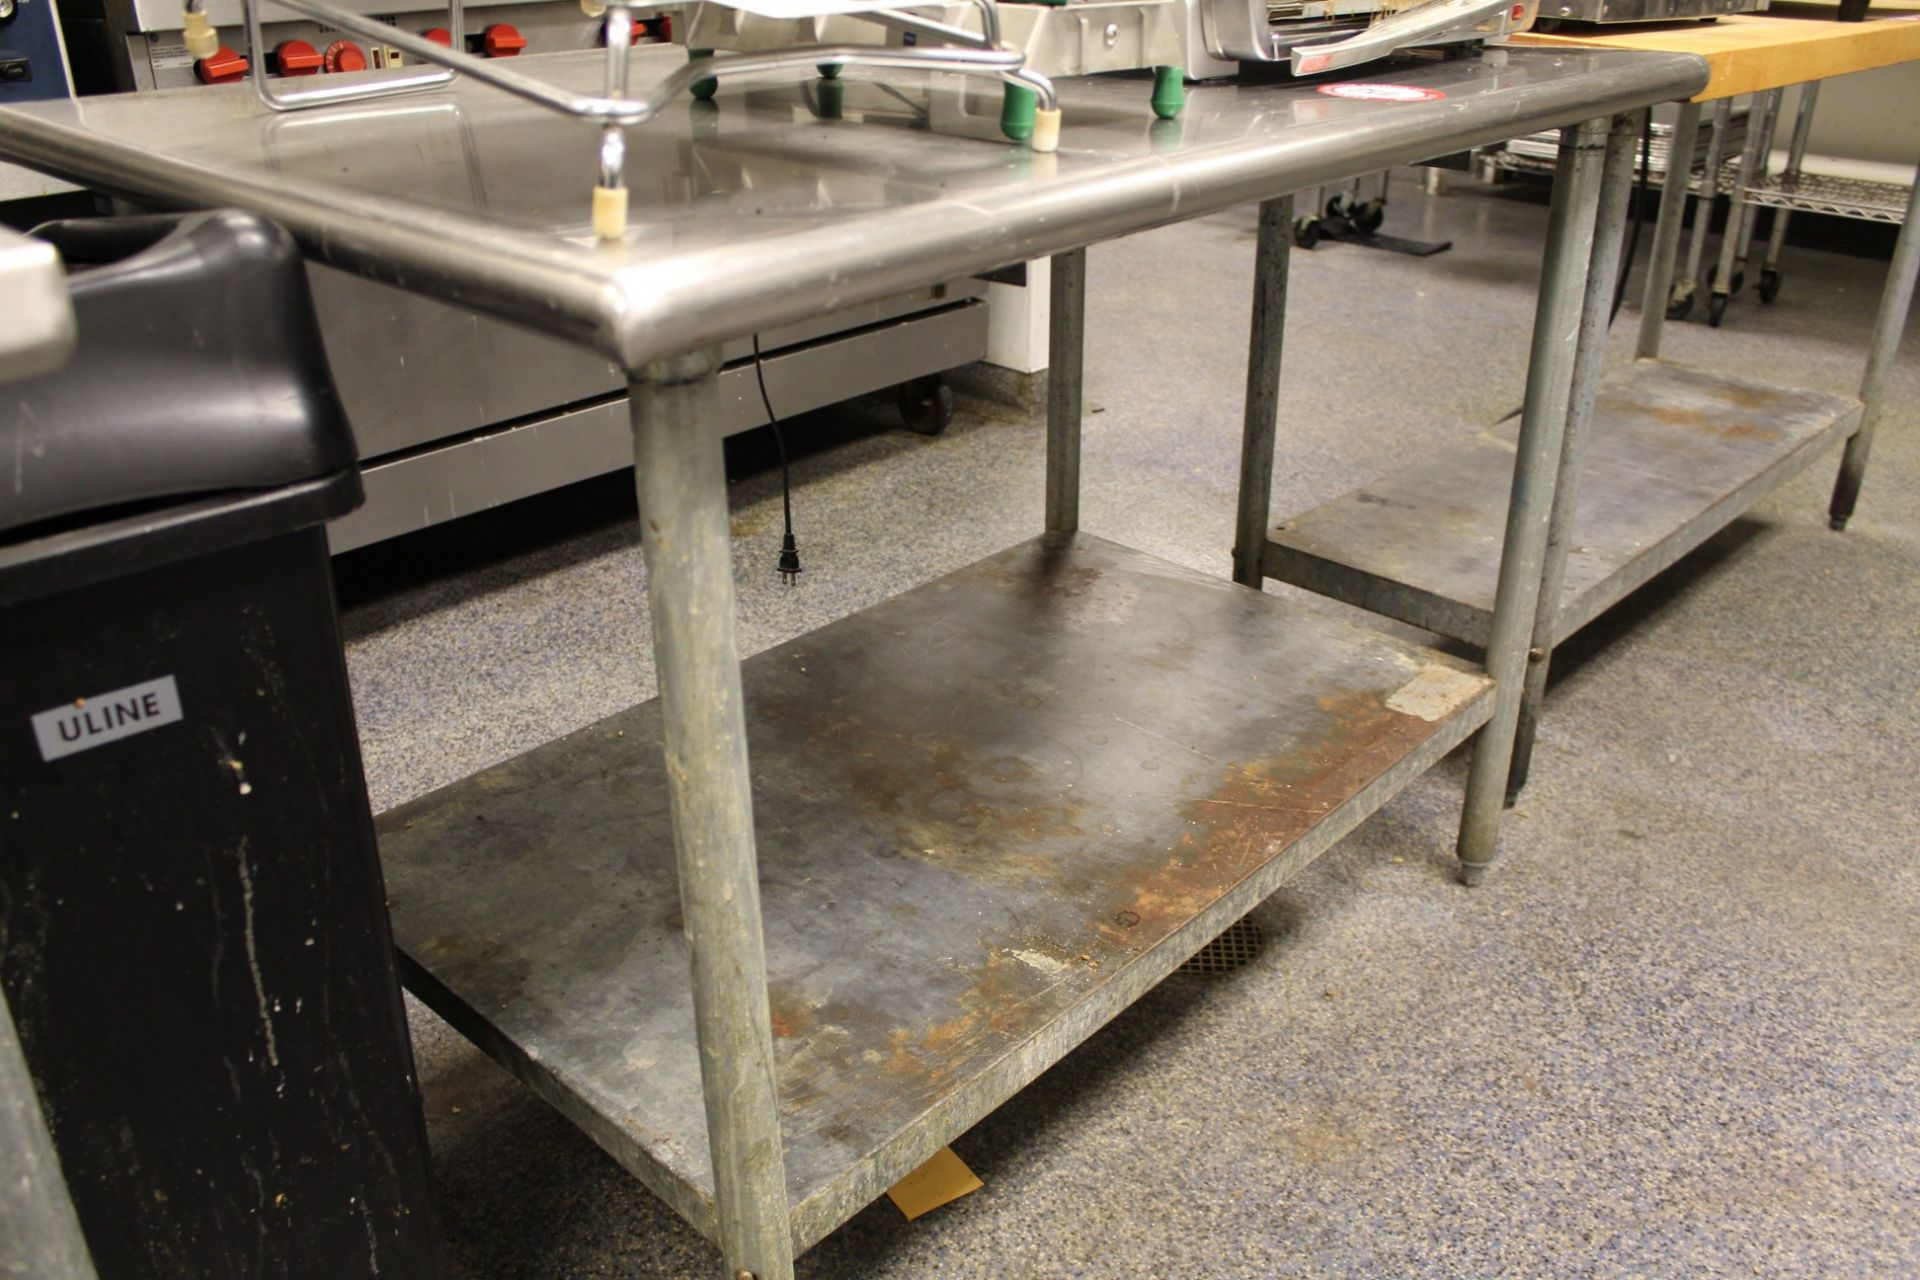 Stainless Steel Work Table 48" x 30"